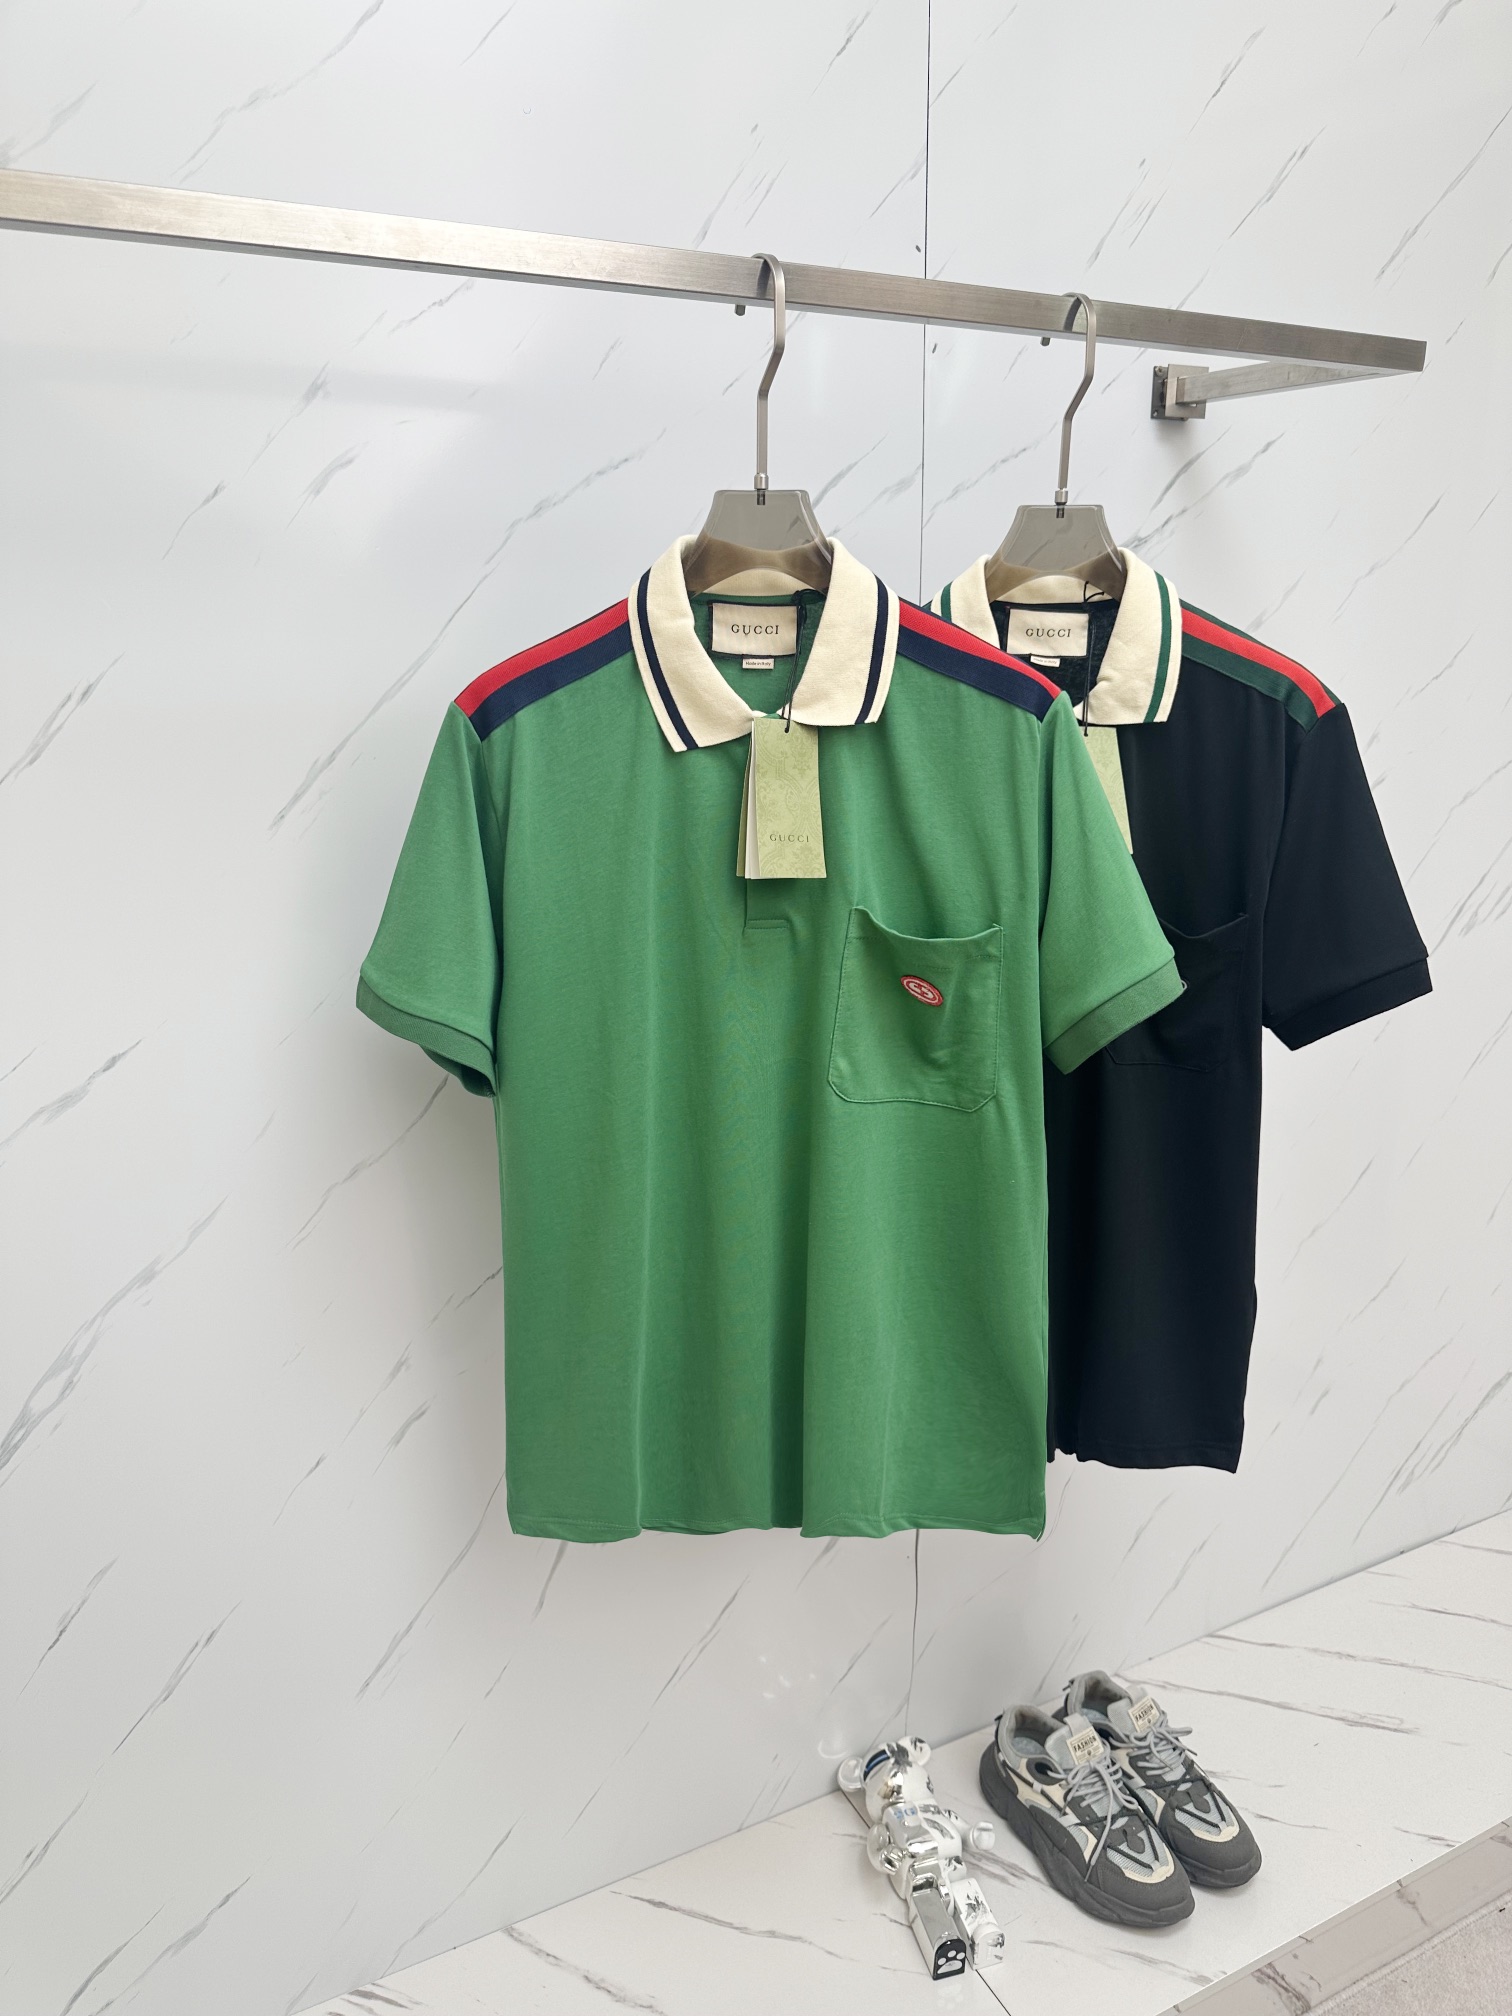 Gucci Clothing Coats & Jackets Pants & Trousers Polo T-Shirt Black Green Red Embroidery Cotton Knitted Knitting Spring/Summer Collection Vintage Short Sleeve